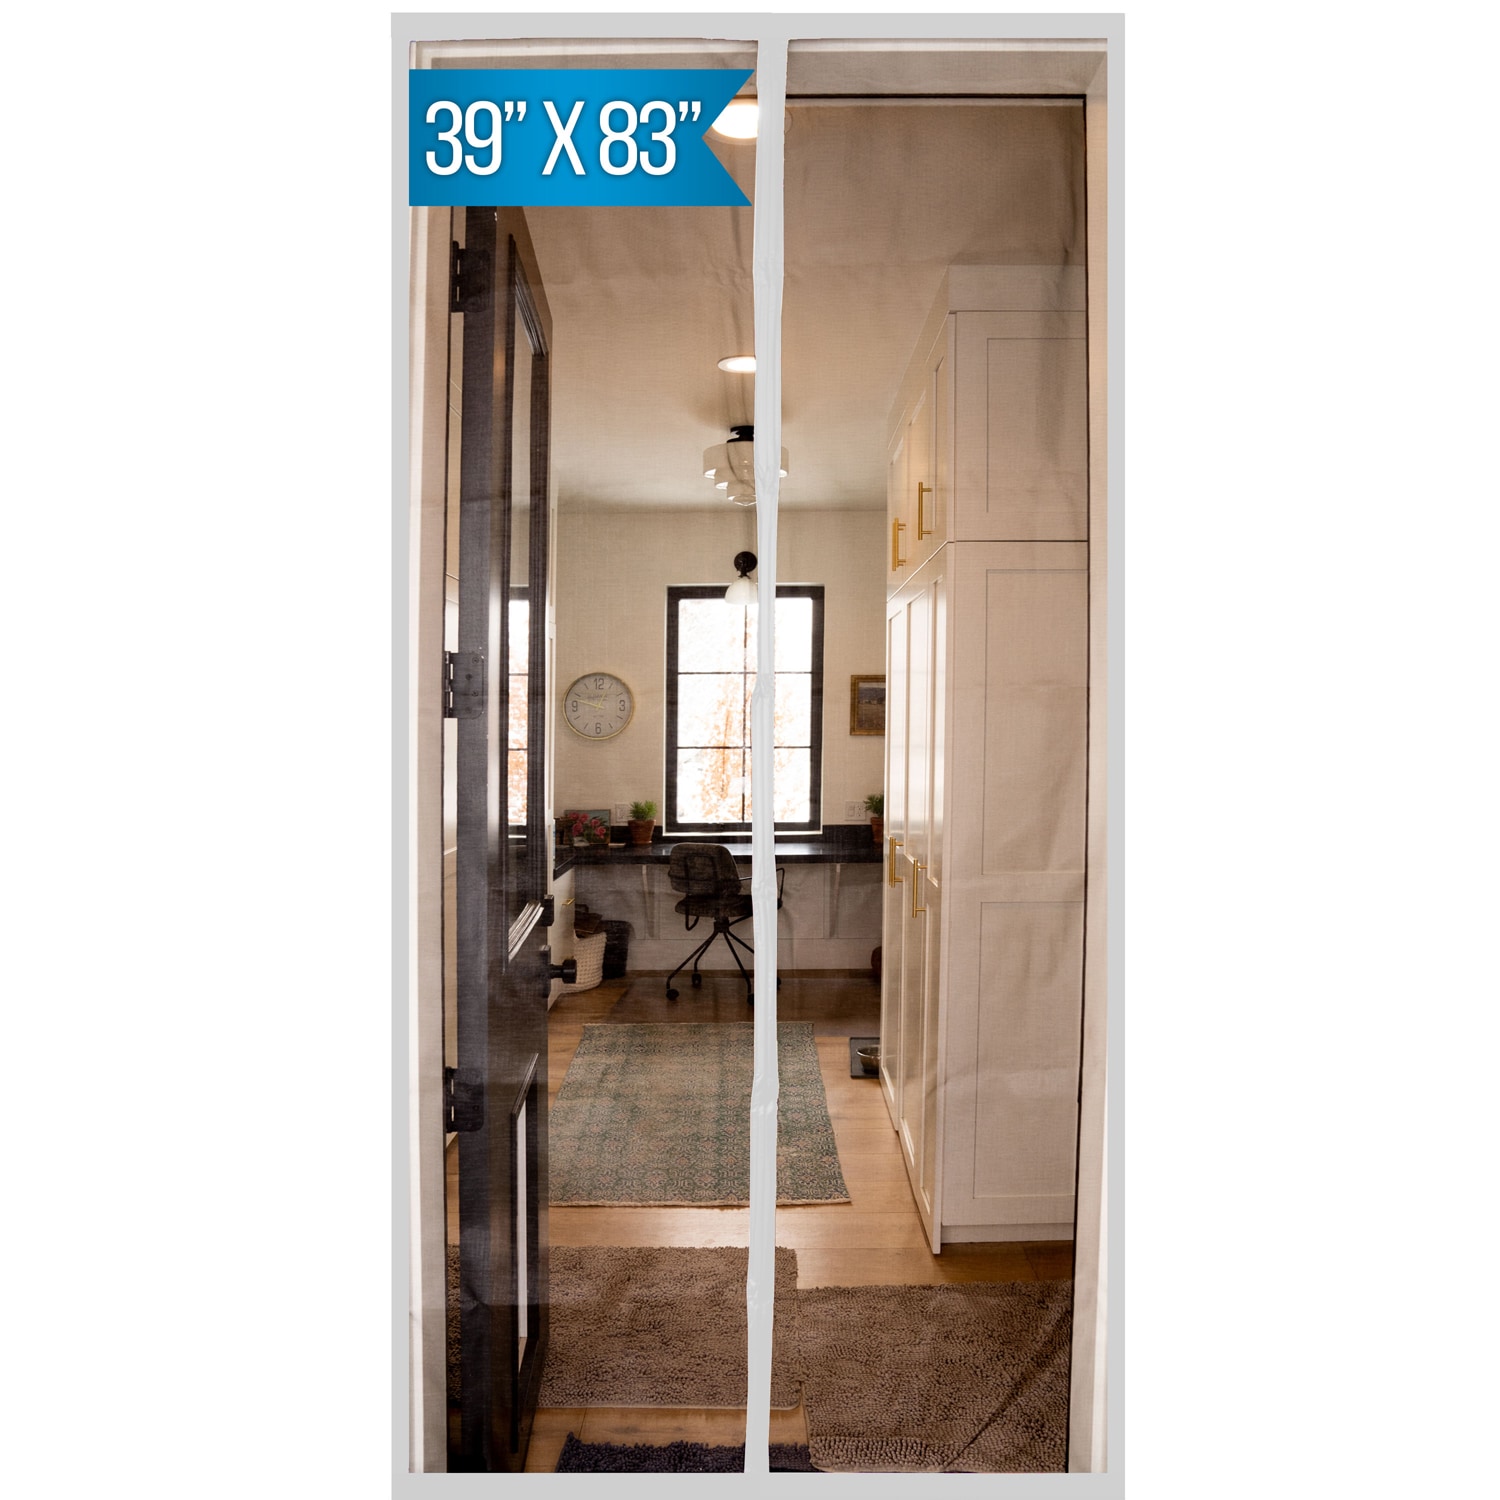 Screen Doors with Magnets Mosquito Fly Net - L - Bed Bath & Beyond -  32593349